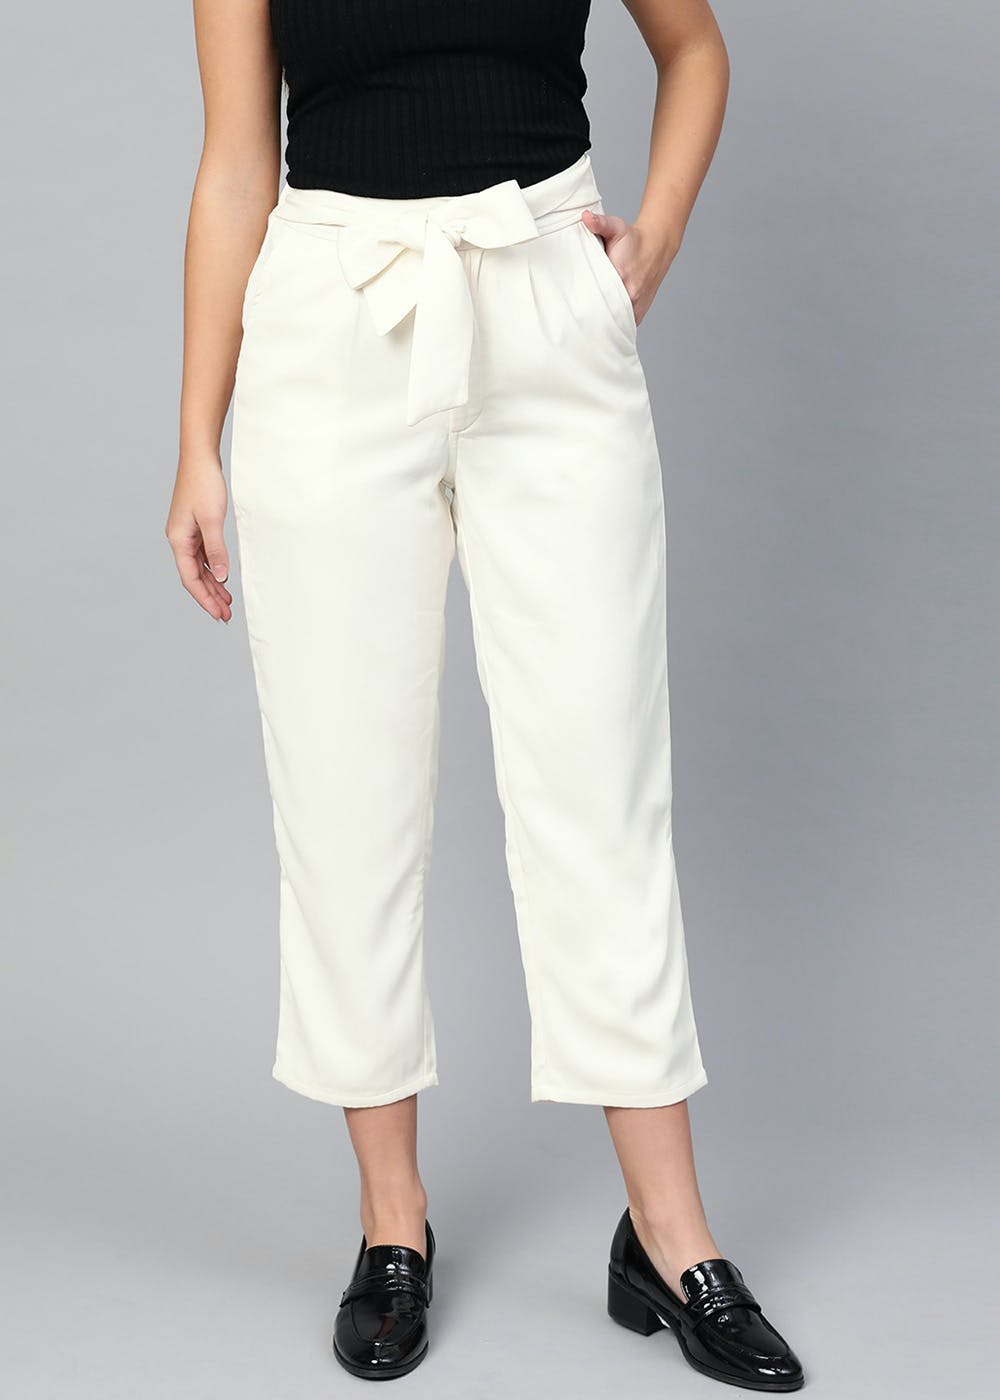 Cotton Ladies Ankle Pant Size  XL XXL Feature  AntiWrinkle  Comfortable Dry Cleaning Easily Washable at Rs 170  Piece in Delhi